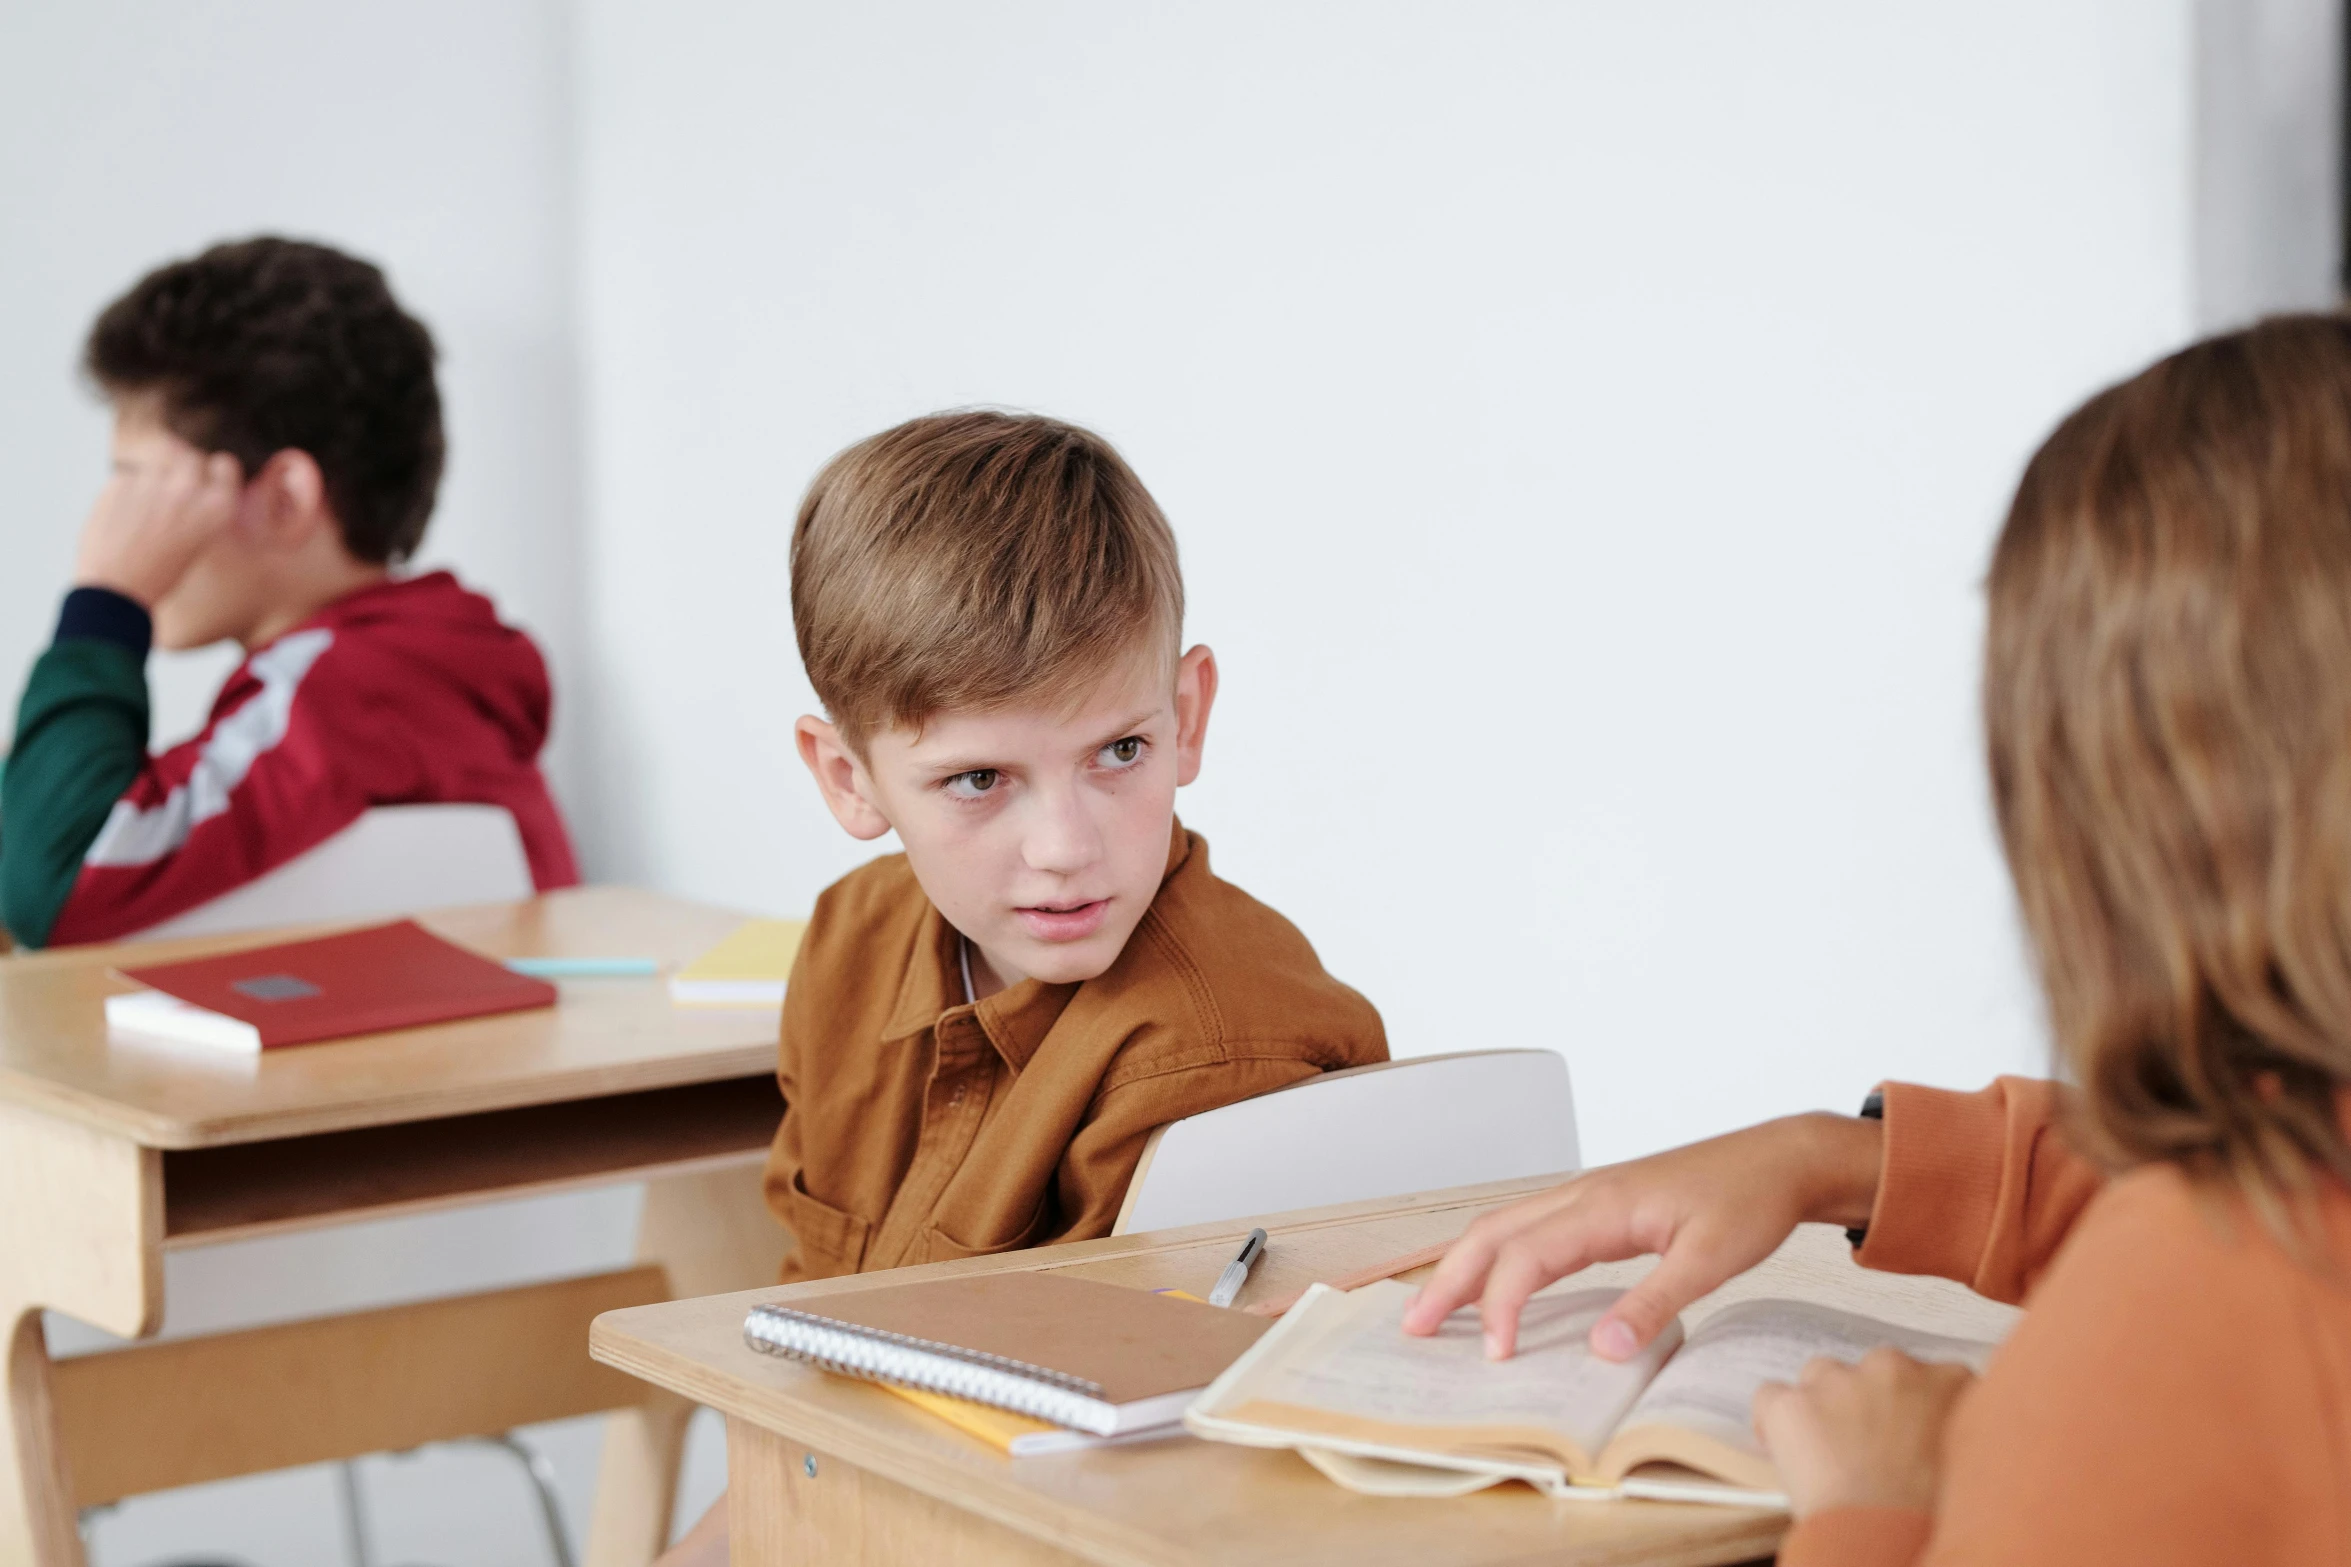 a group of children sitting at desks in a classroom, pexels contest winner, incoherents, angry look in his face, medium shot of two characters, 15081959 21121991 01012000 4k, boy with neutral face